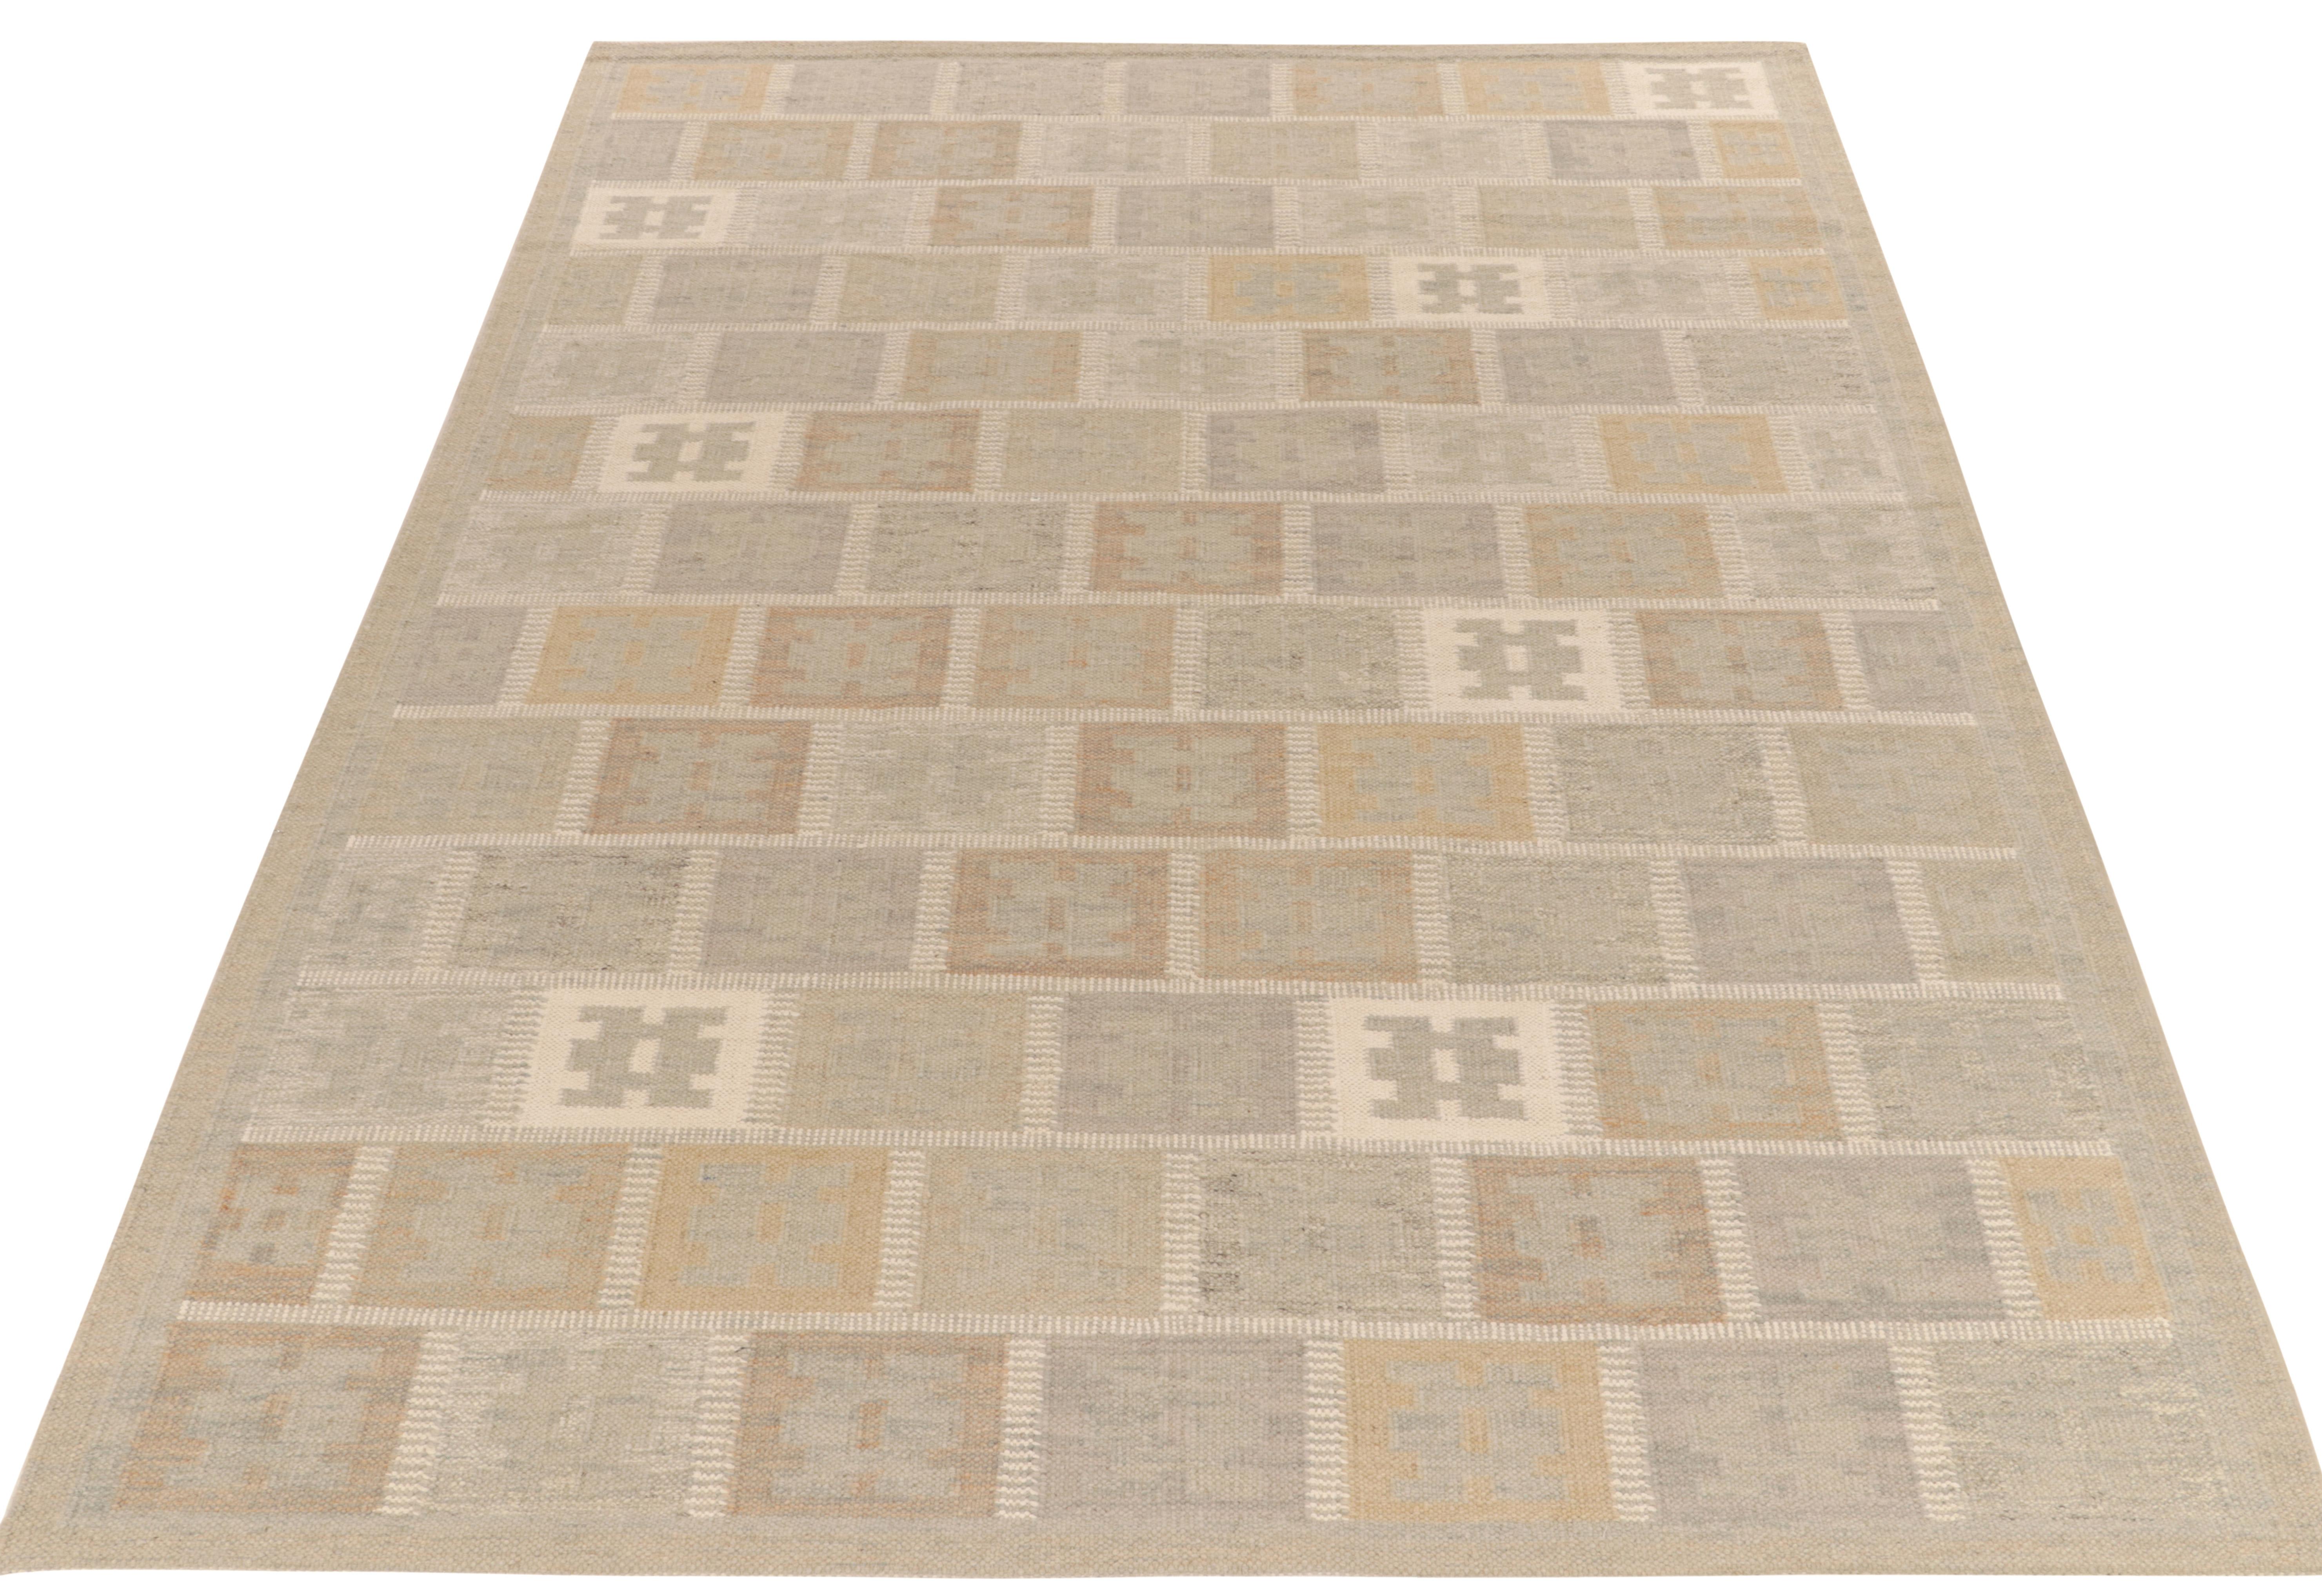 Handwoven in fine quality wool, a 9x12 Kilim from our award-winning repertoire of Scandinavian flatweaves. The kilim rug features a depthful geometric movement reveling in muted gray & beige/brown tones with a quiet appeal in Swedish Modernist